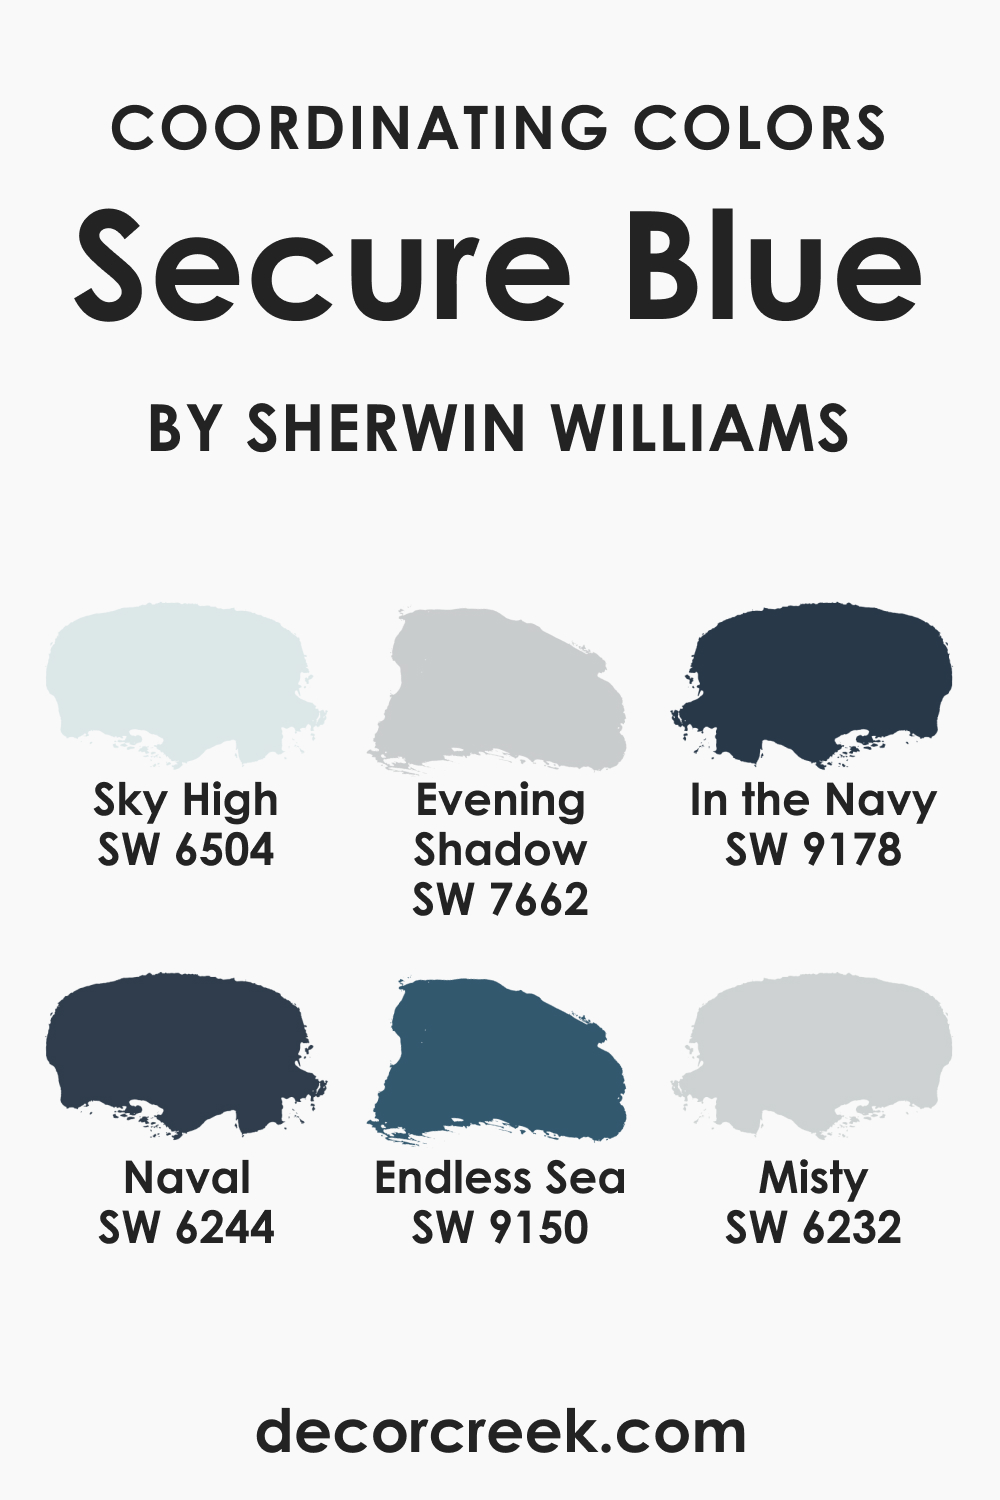 Coordinating Colors of Secure Blue SW 6508